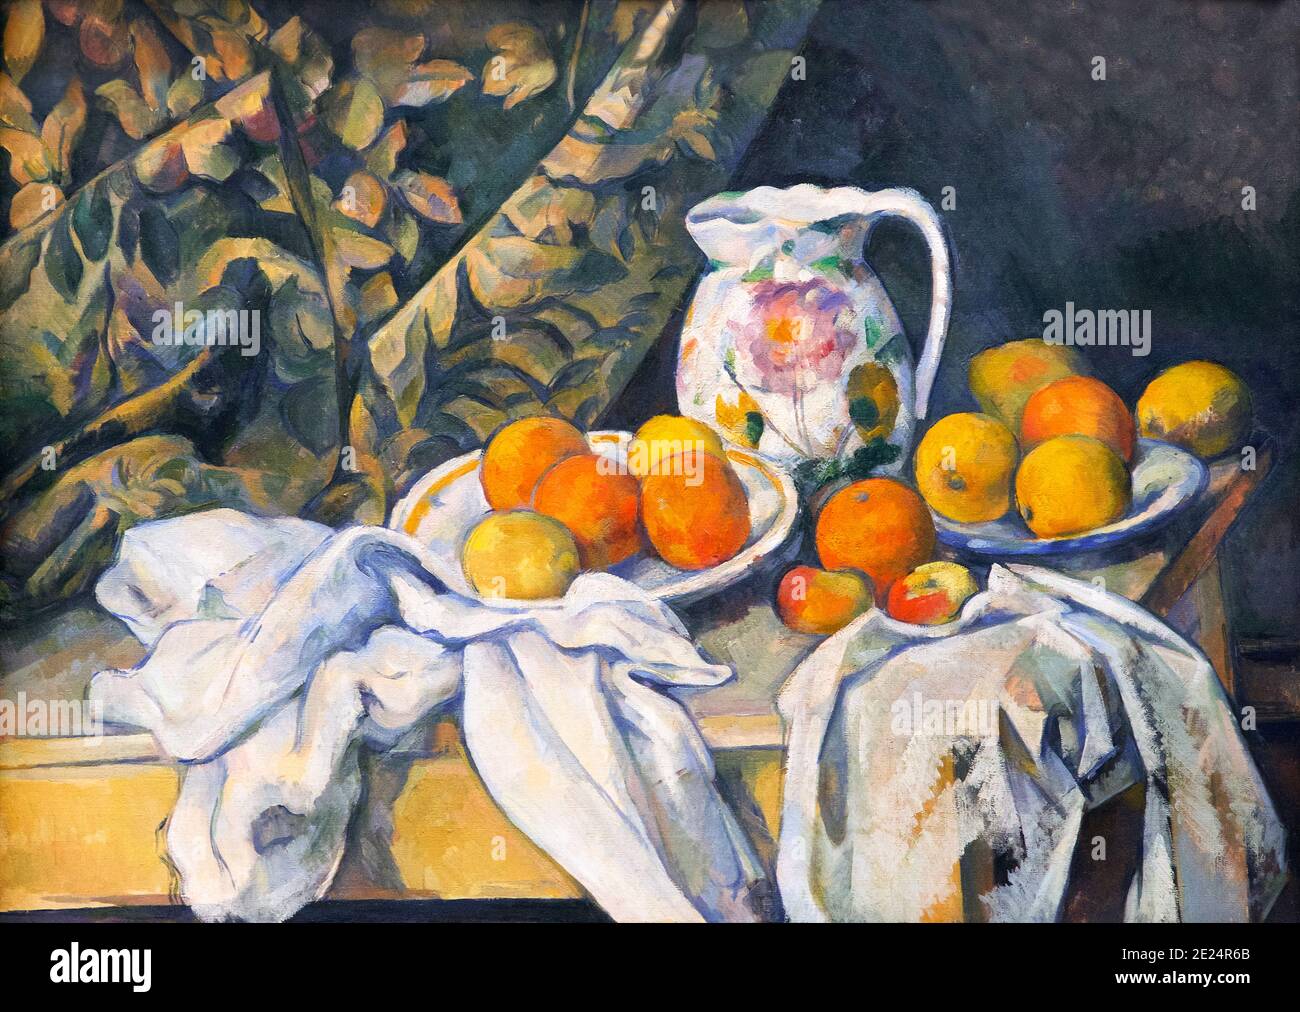 Still Life with a Curtain and Flowered Pitcher,  Paul Cezanne, circa 1895, State Hermitage Museum, Saint Petersburg, Russia Stock Photo